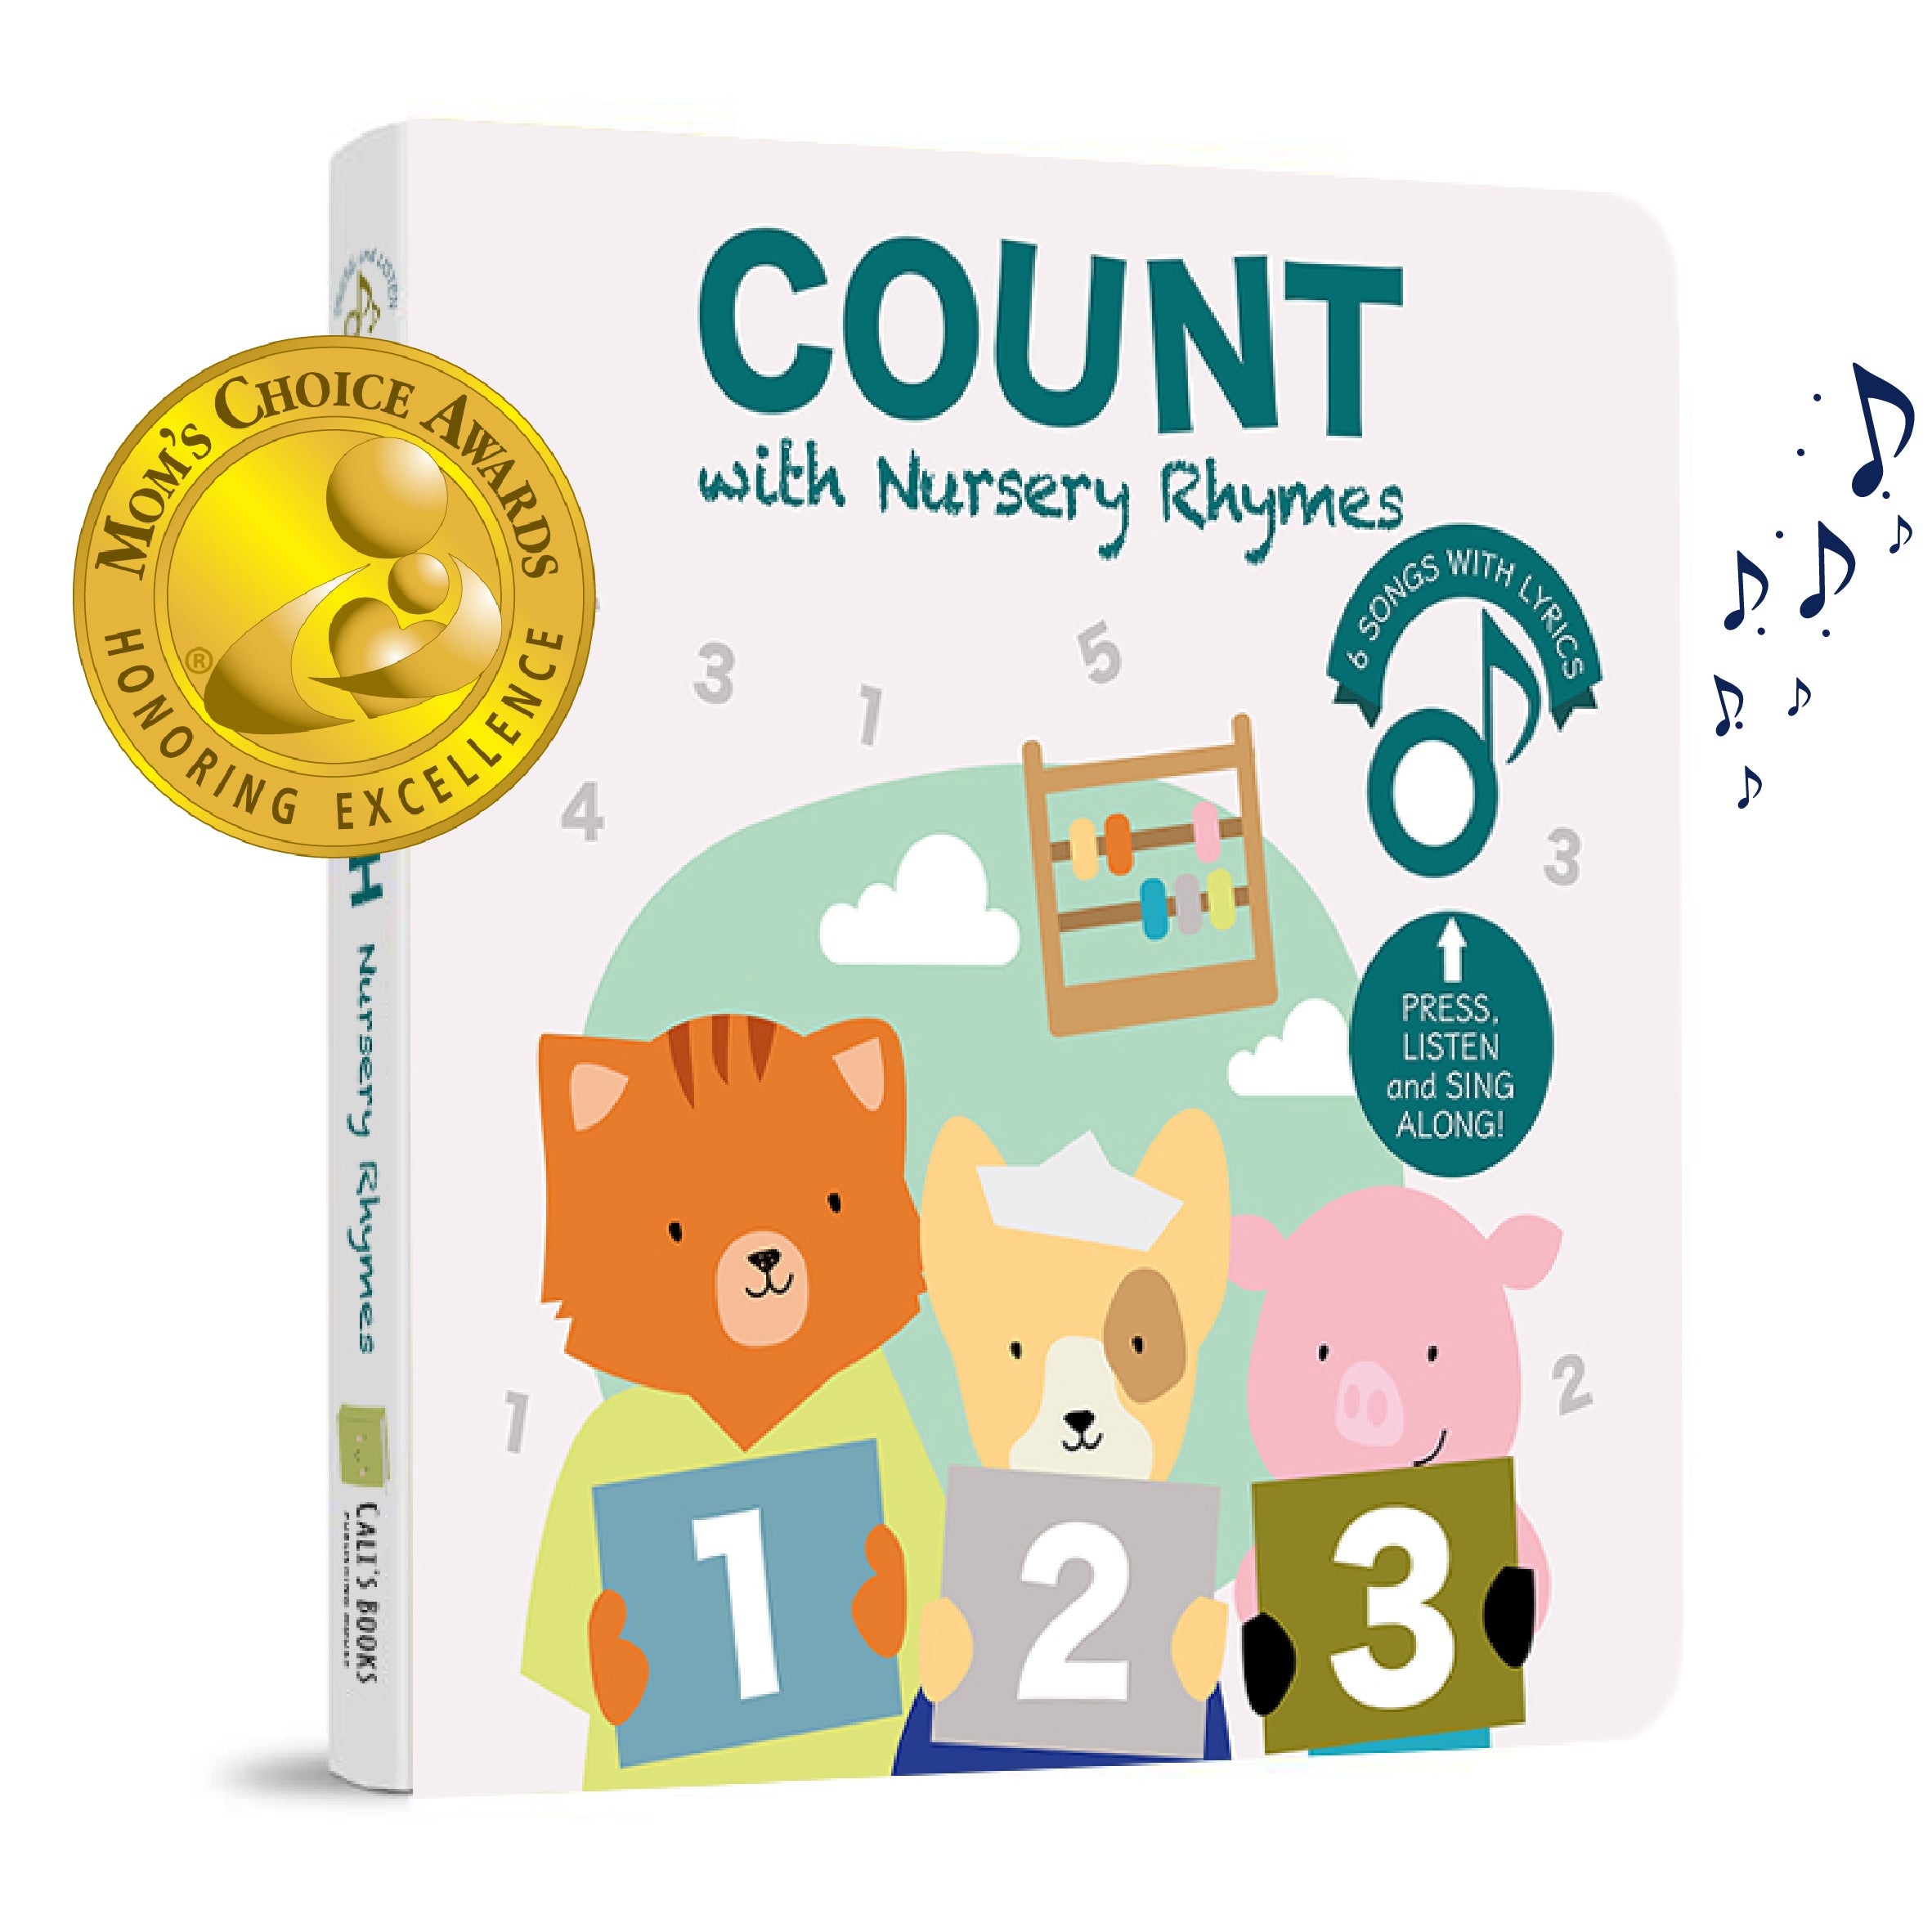 Cali's Book - Count with Nursery Rhymes